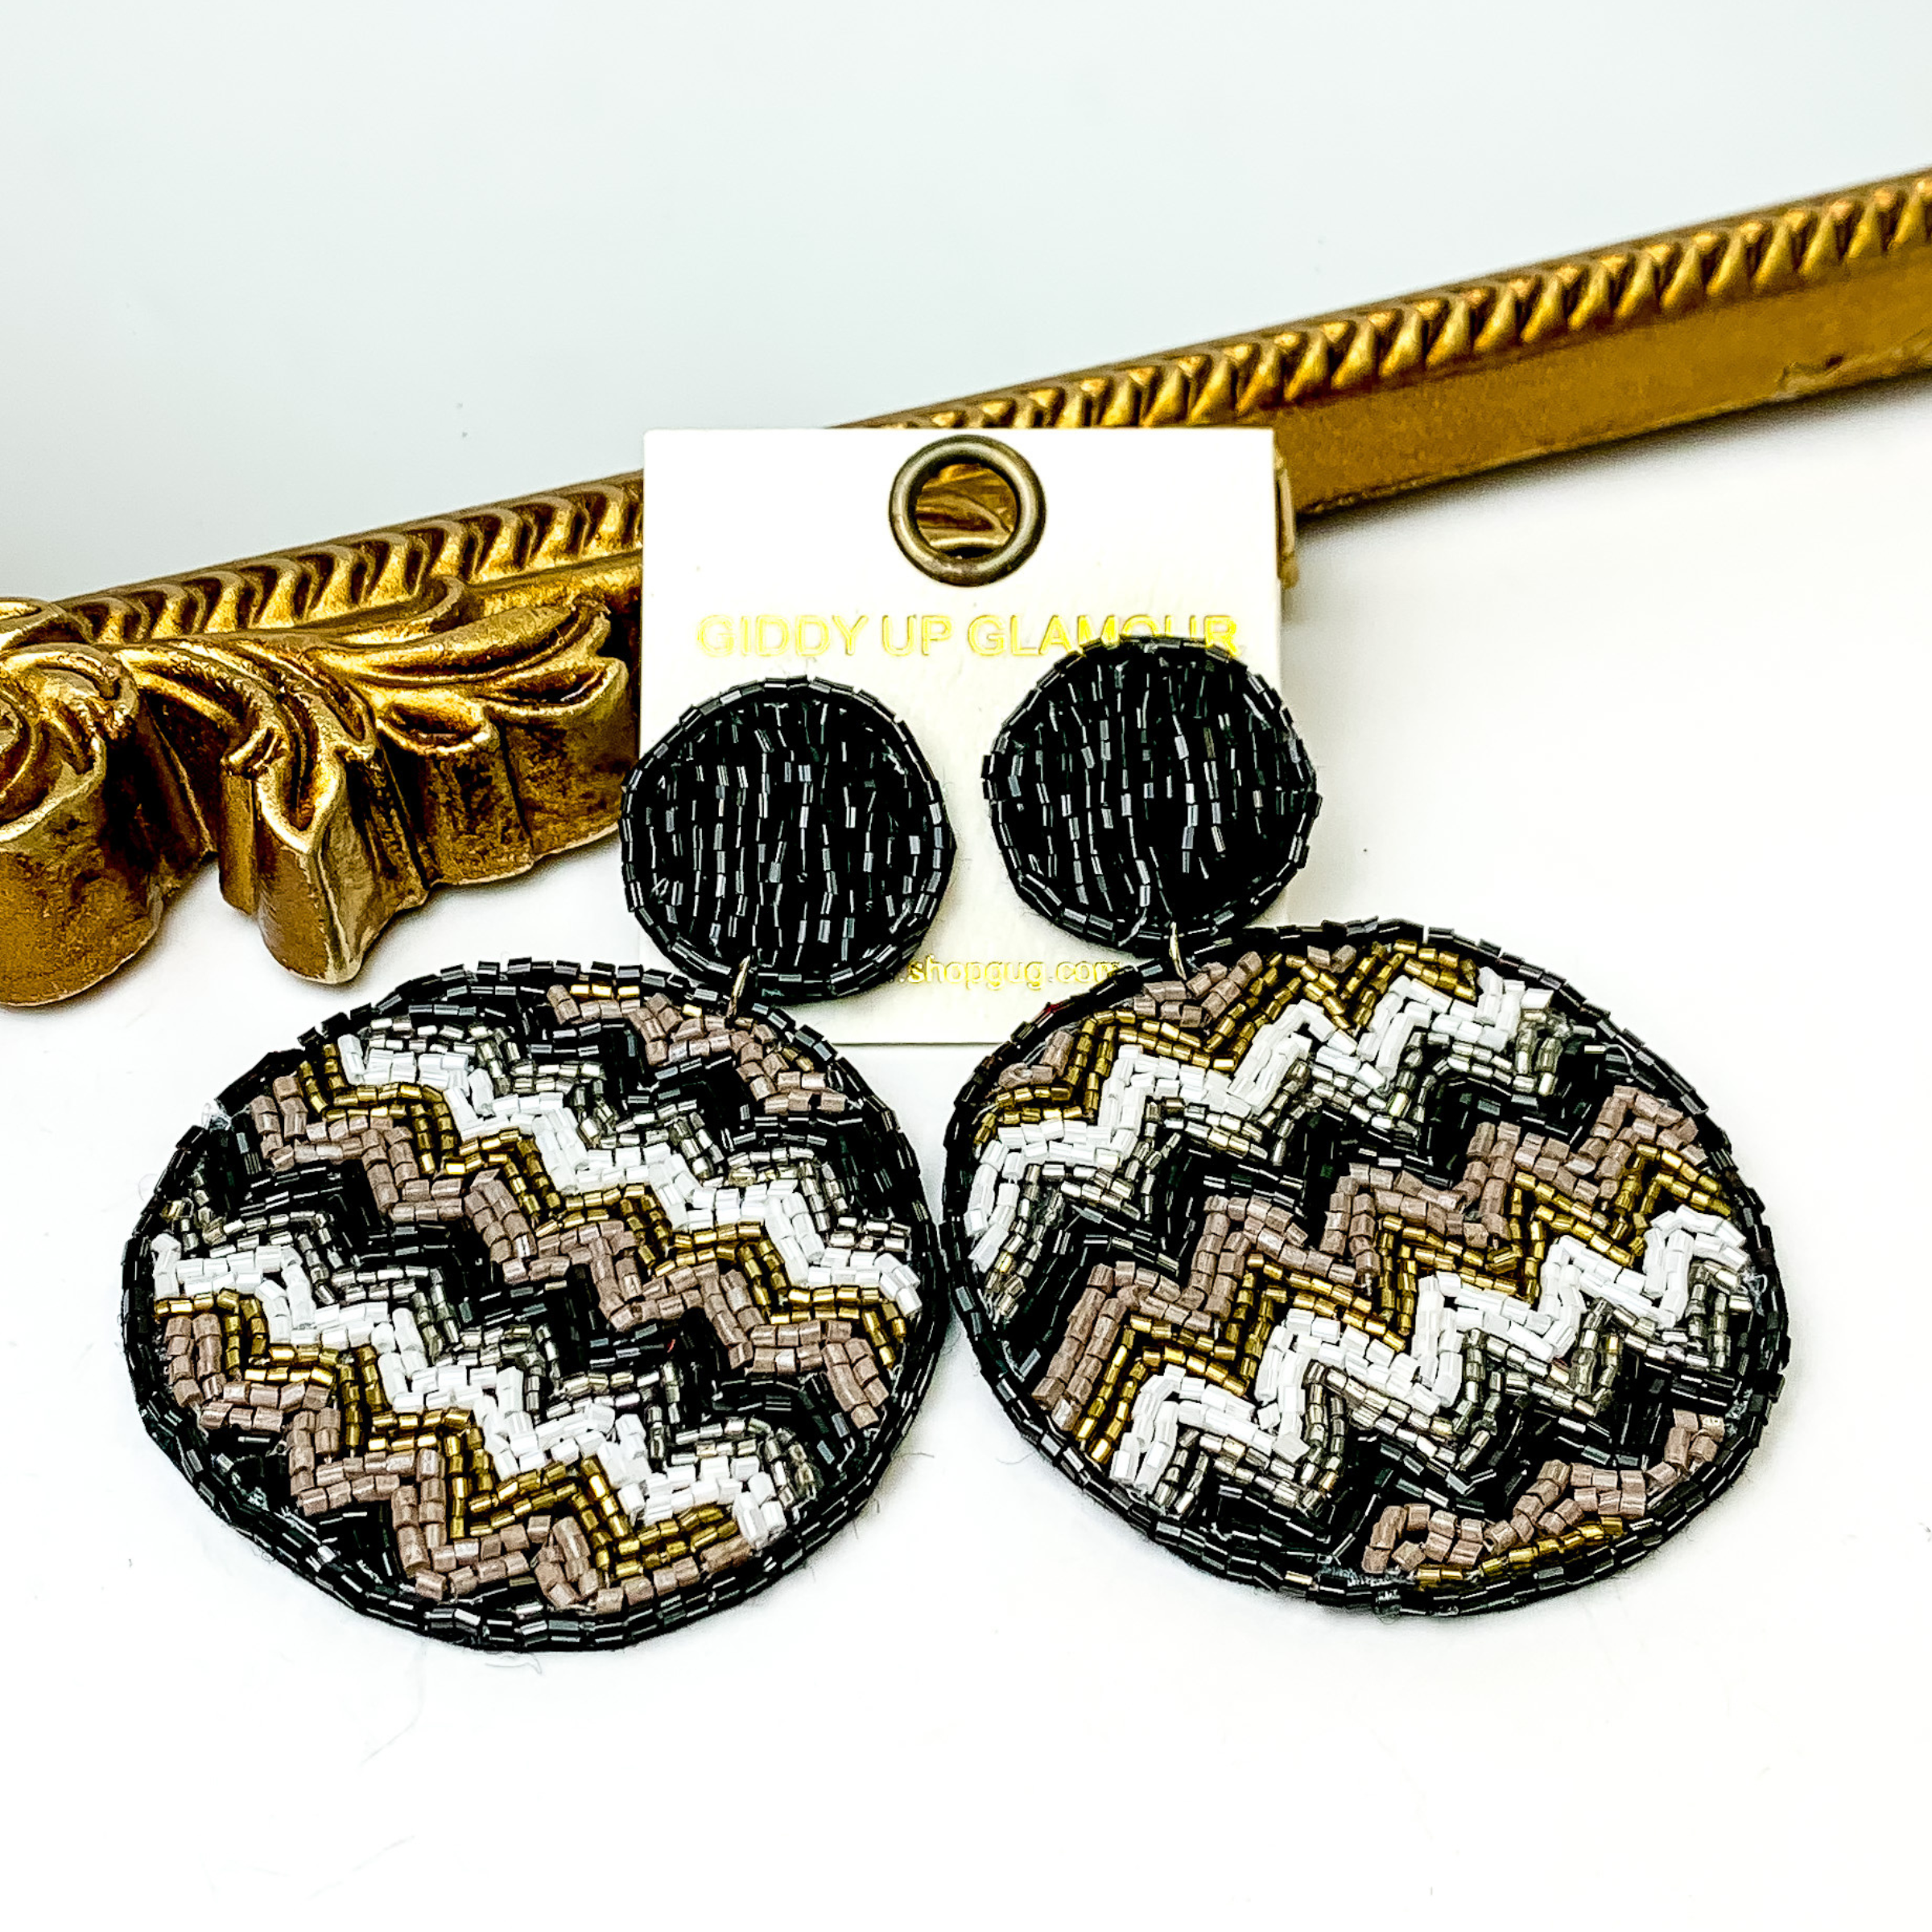 These are circle post back, black beaded earrings with a beaded circle drop. These earrings include a chevron pattern with bronze beads, silver beads,white beads and black beads. These earrings are pictured in front of a gold mirror on a white background. 